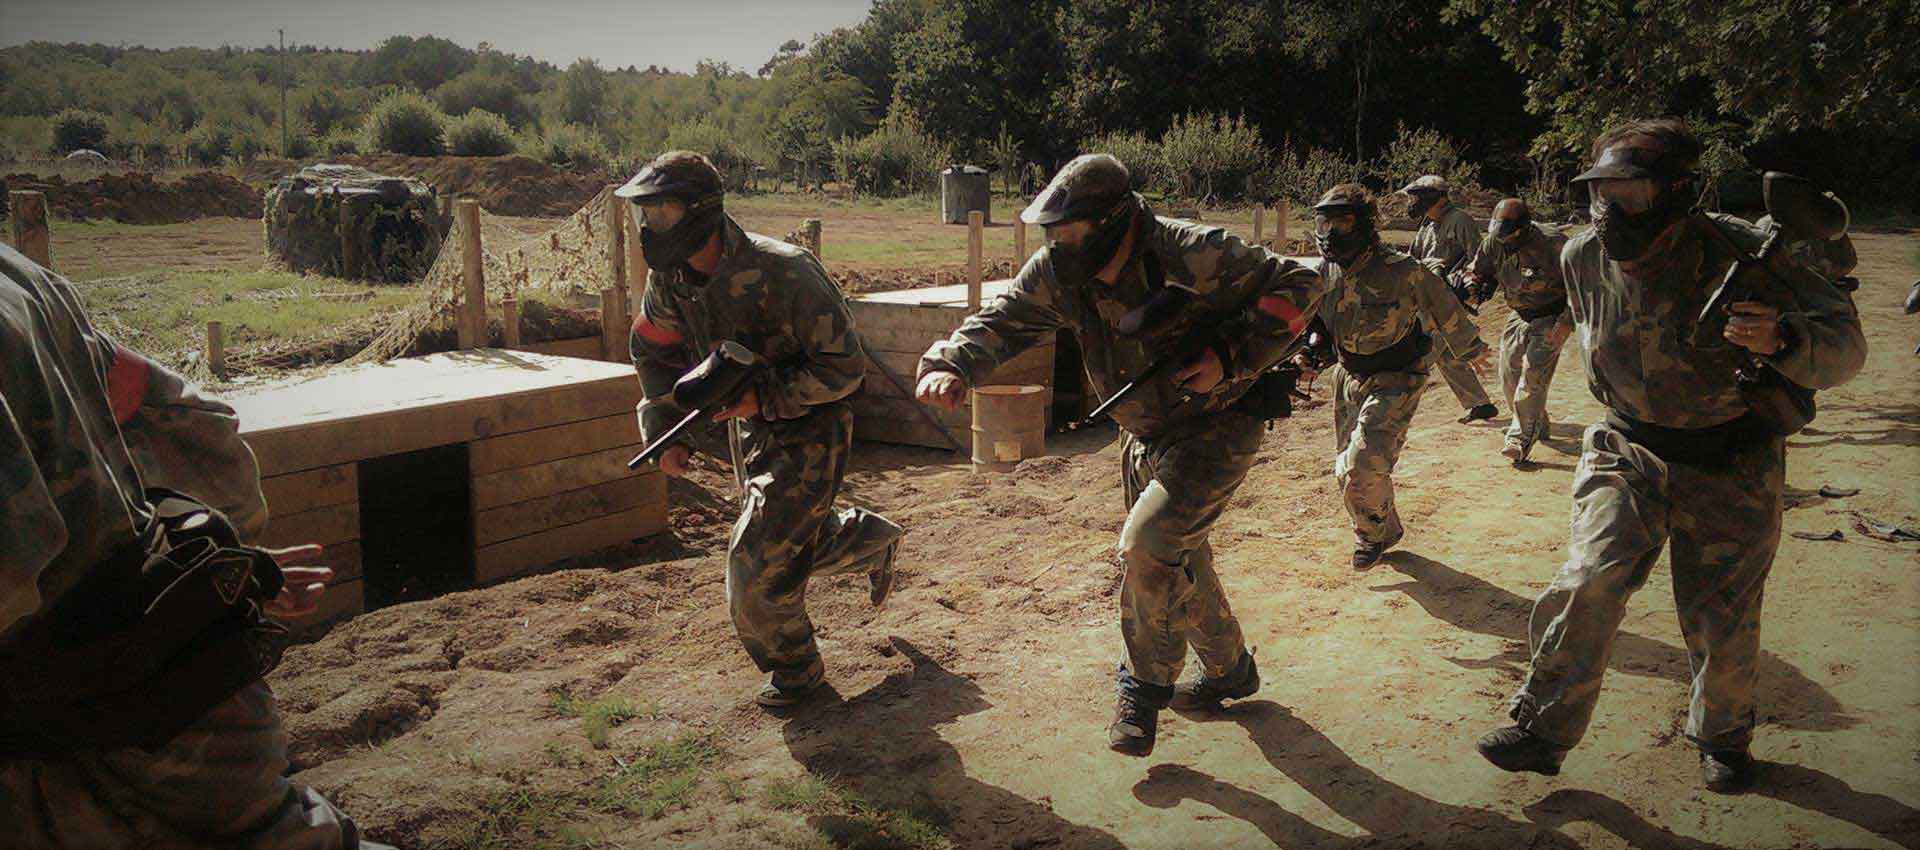 Members of the red team run as they storm a trench system with their paintball guns.